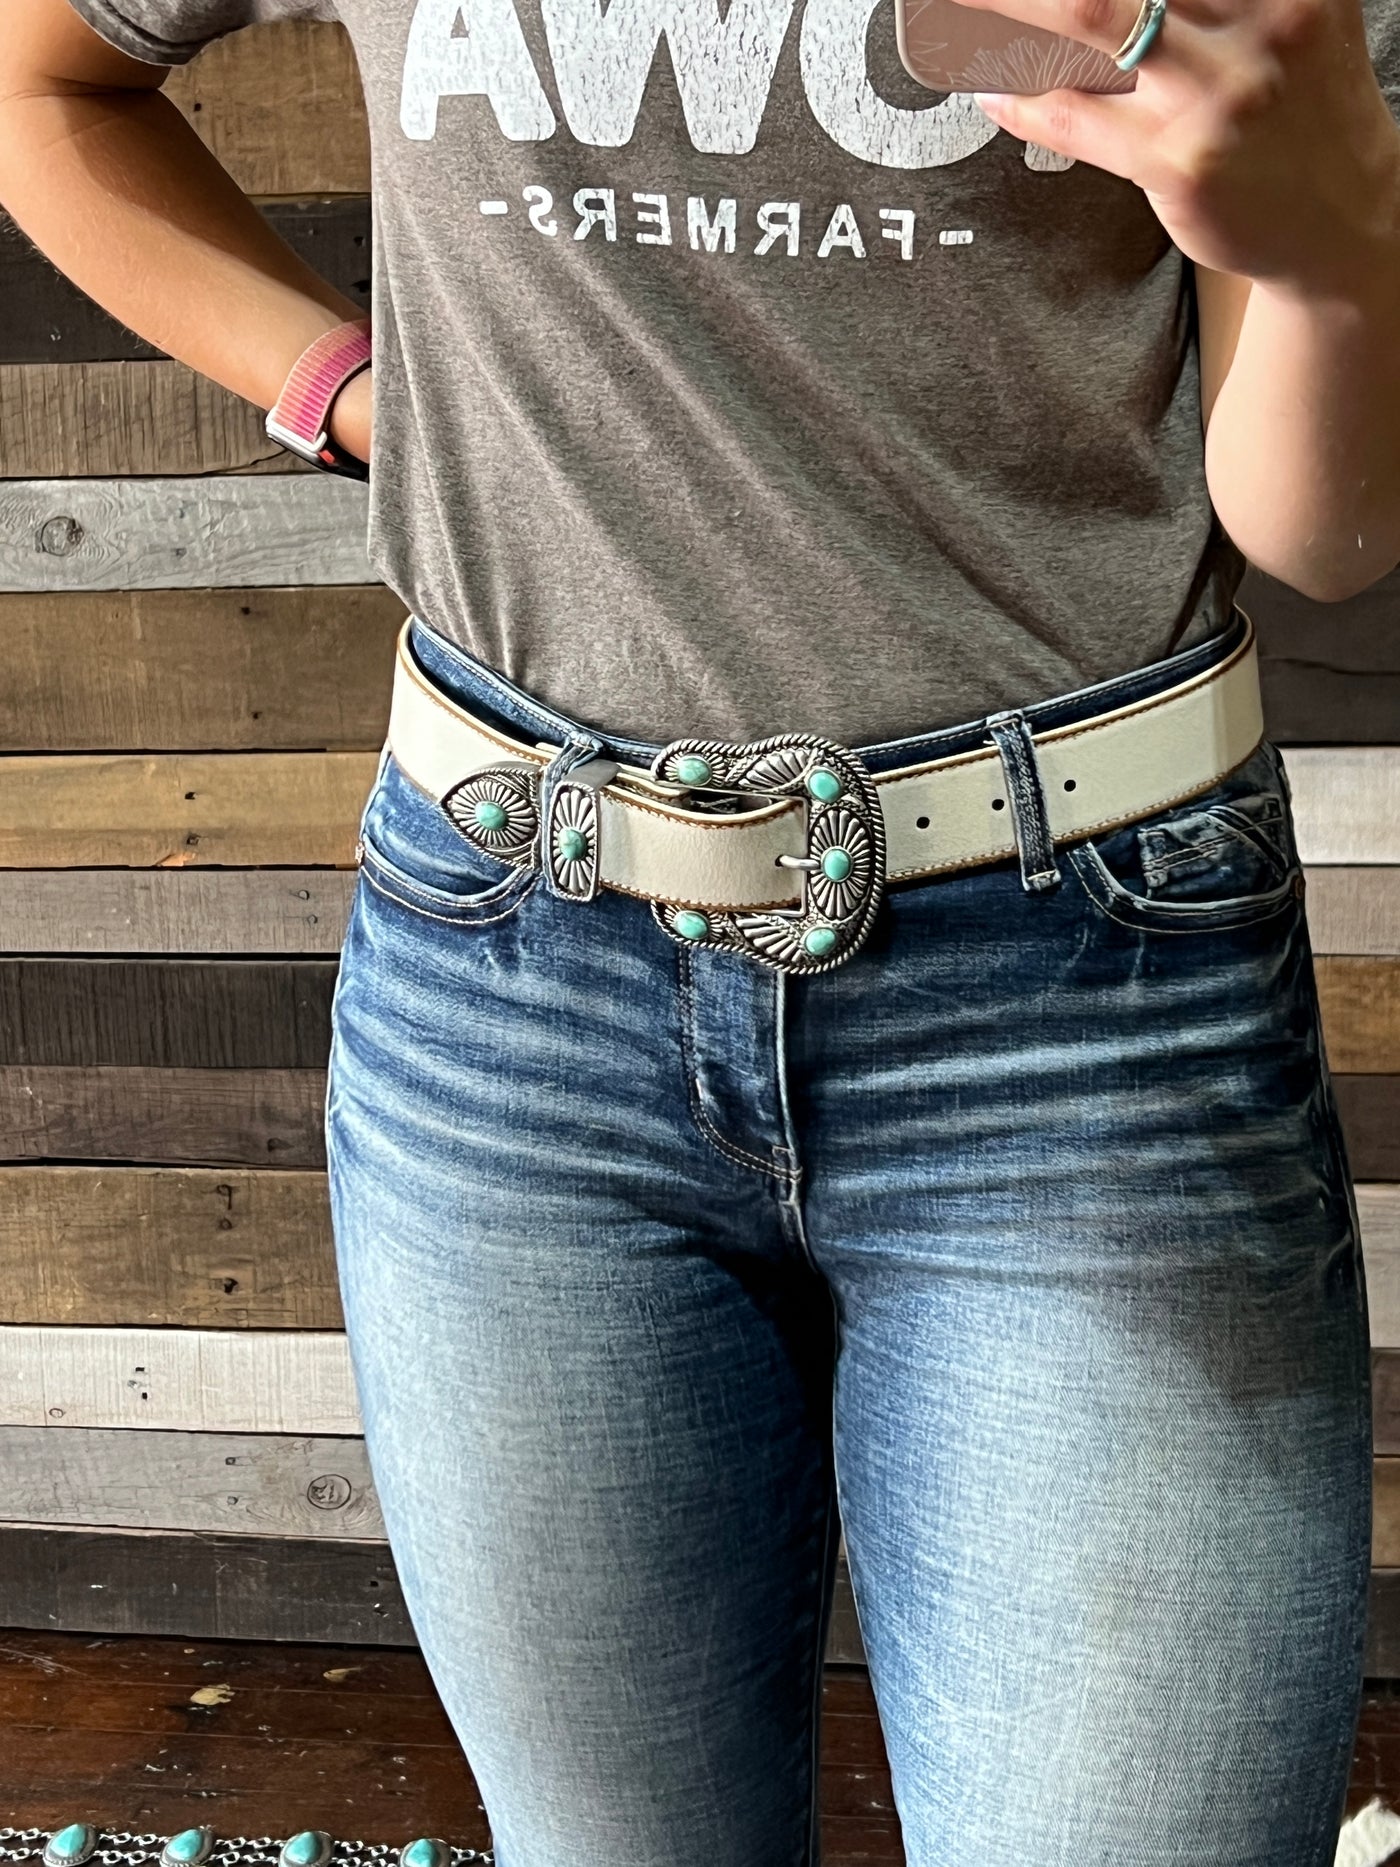 Dylan Off-White Leather Turquoise Belt